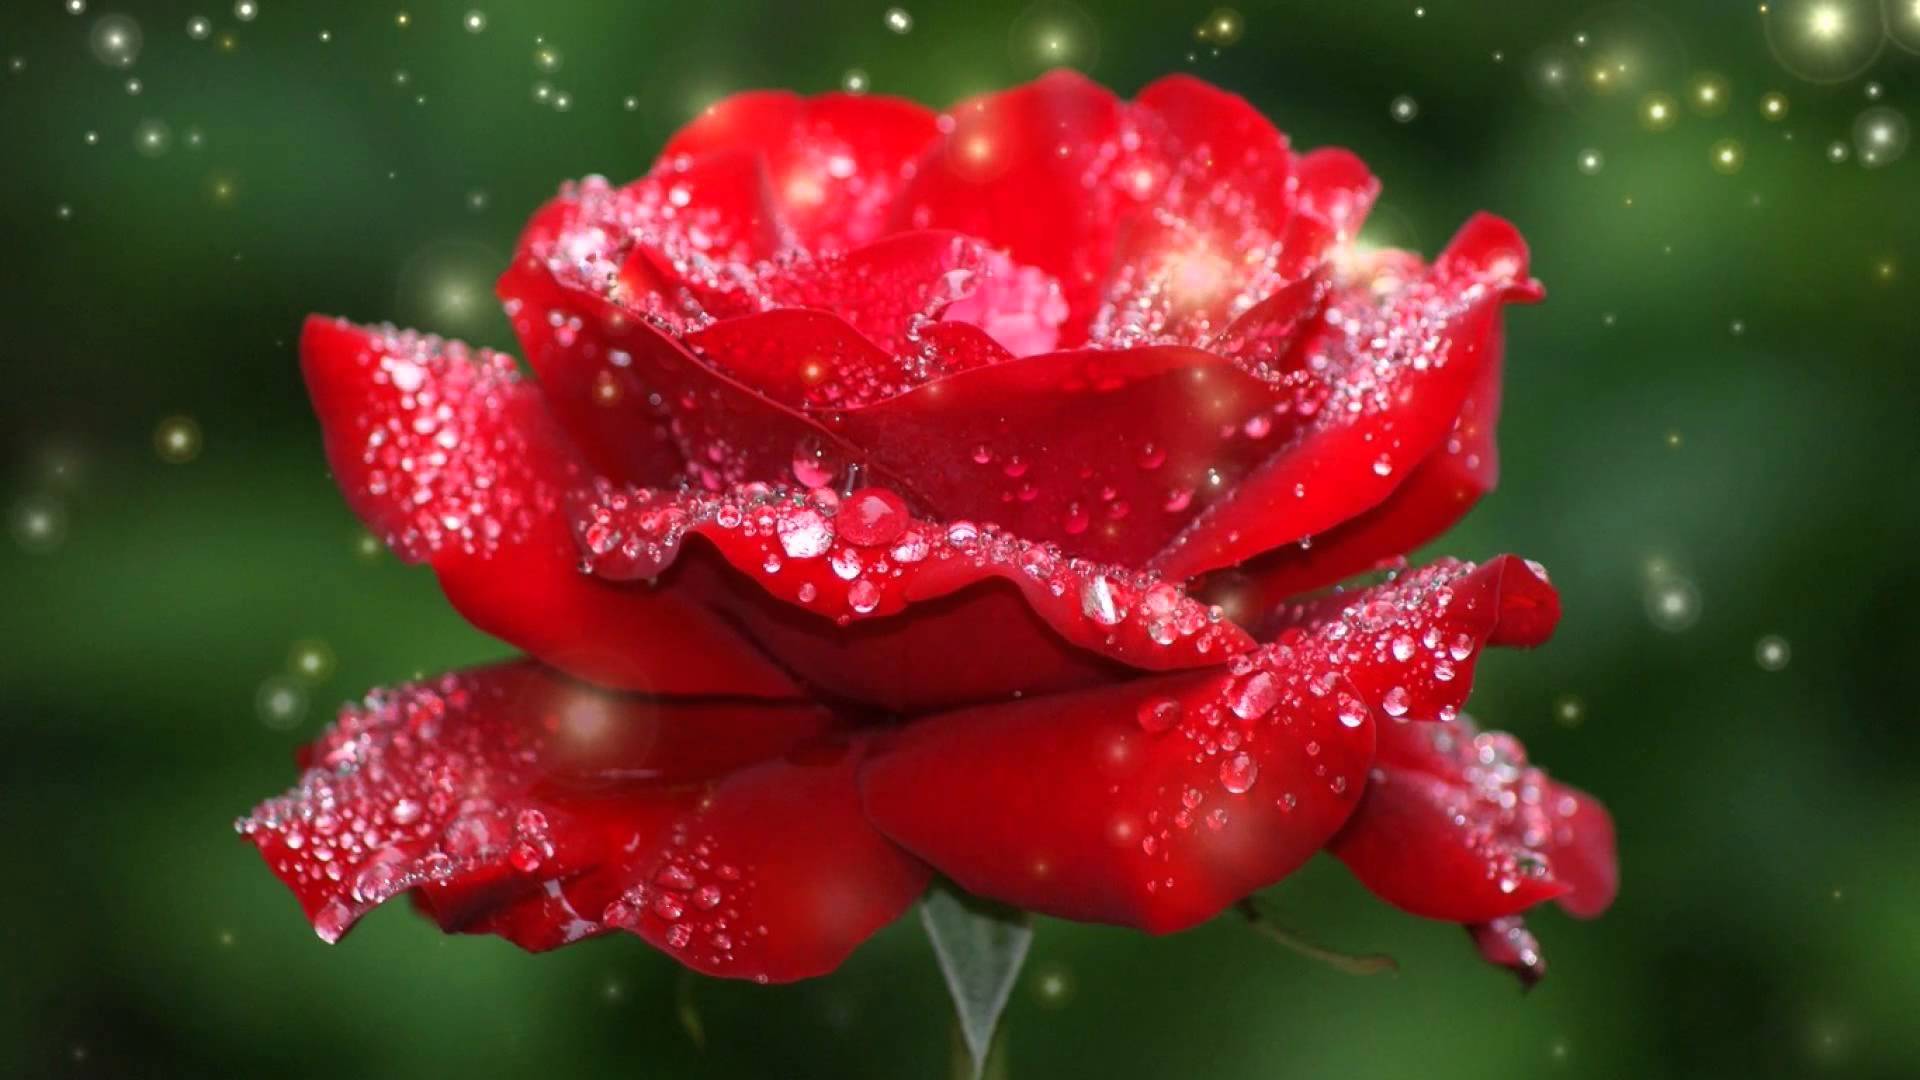 Wish someone a Happy Rose Day with a rose that conveys your feelings